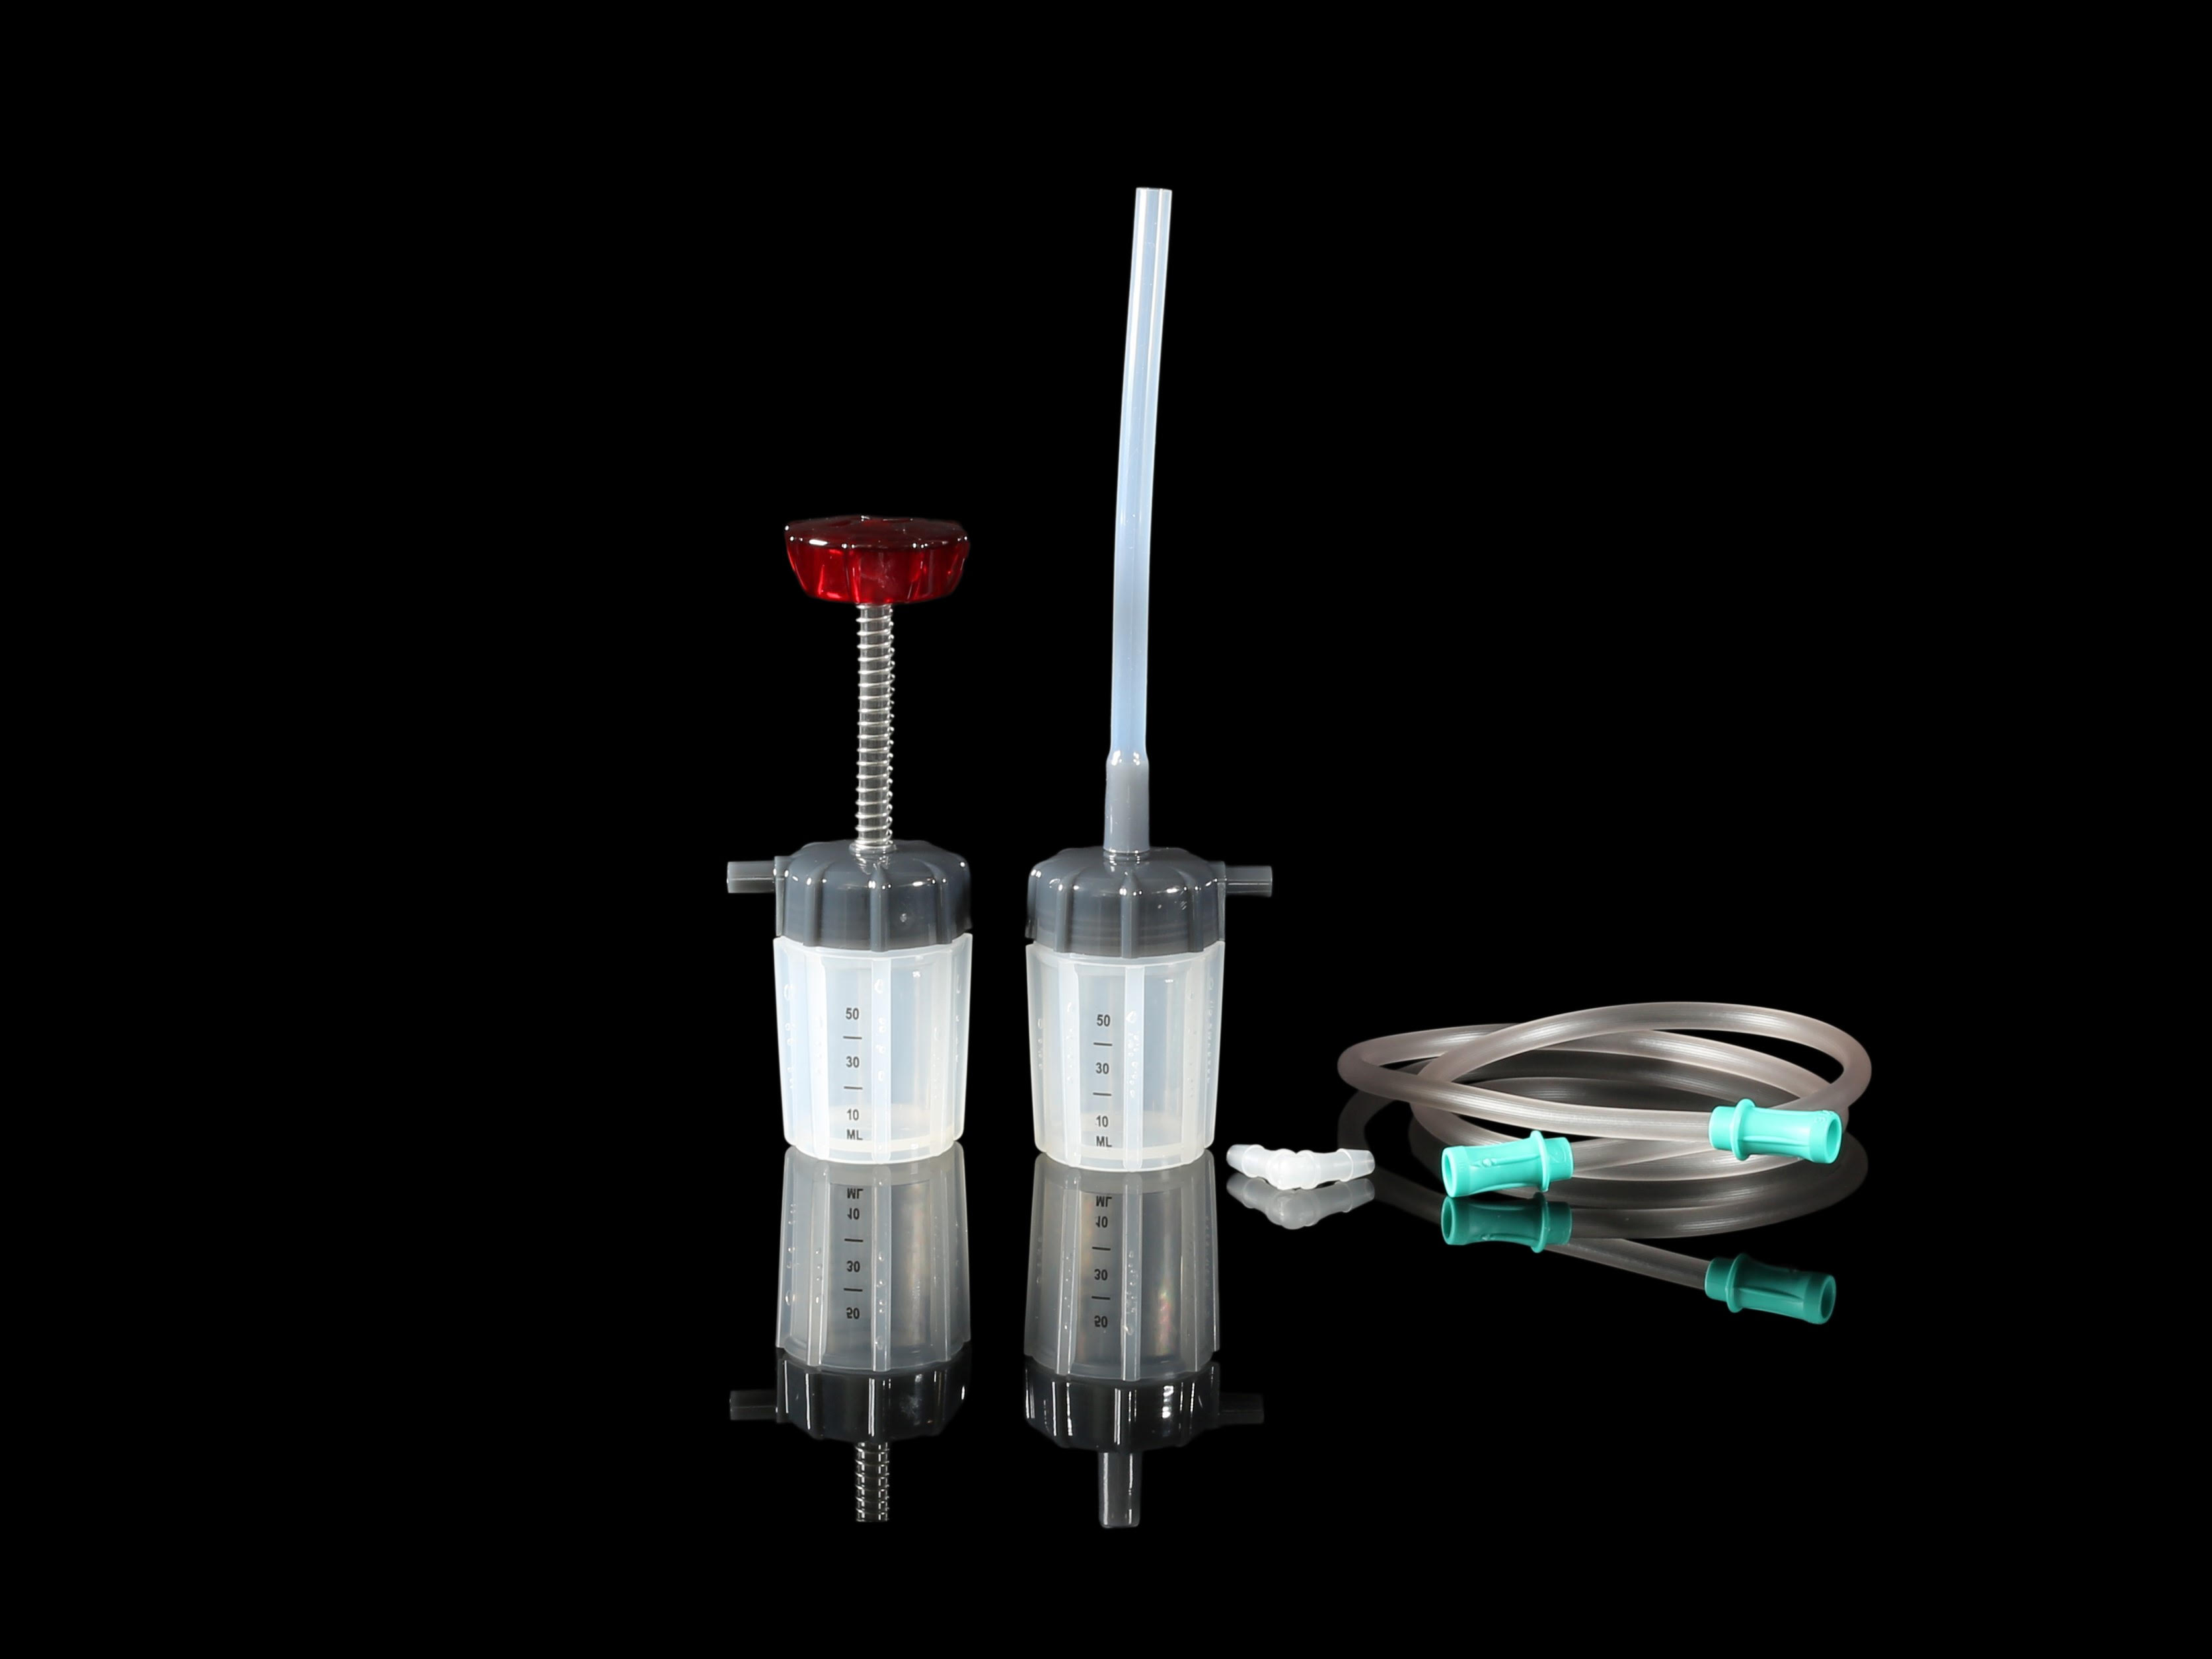 THE High-Yield Autograft Harvesting device for spinal decompression and cranial fusion procedures. Clinically proven in nearly 30K cases from Anterior and Posterior spinal decompression and fusion procedures using the high speed drill. Cranial harvesting turning the flap and even tumor collection.